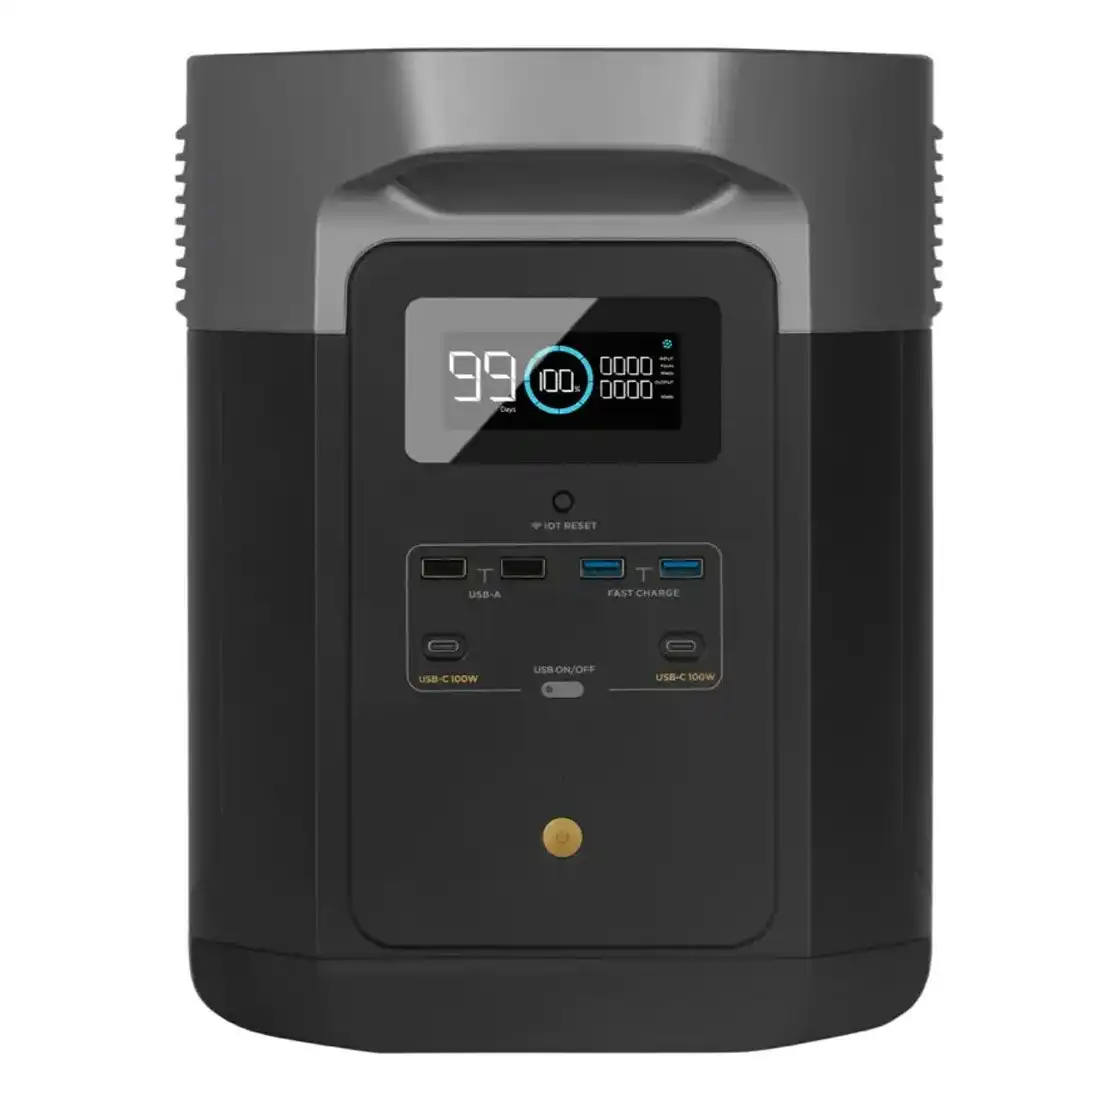 Ecoflow DELTA MAX (1600) Portable Power Station - 2kW Output and 1612Wh Battery Capacity